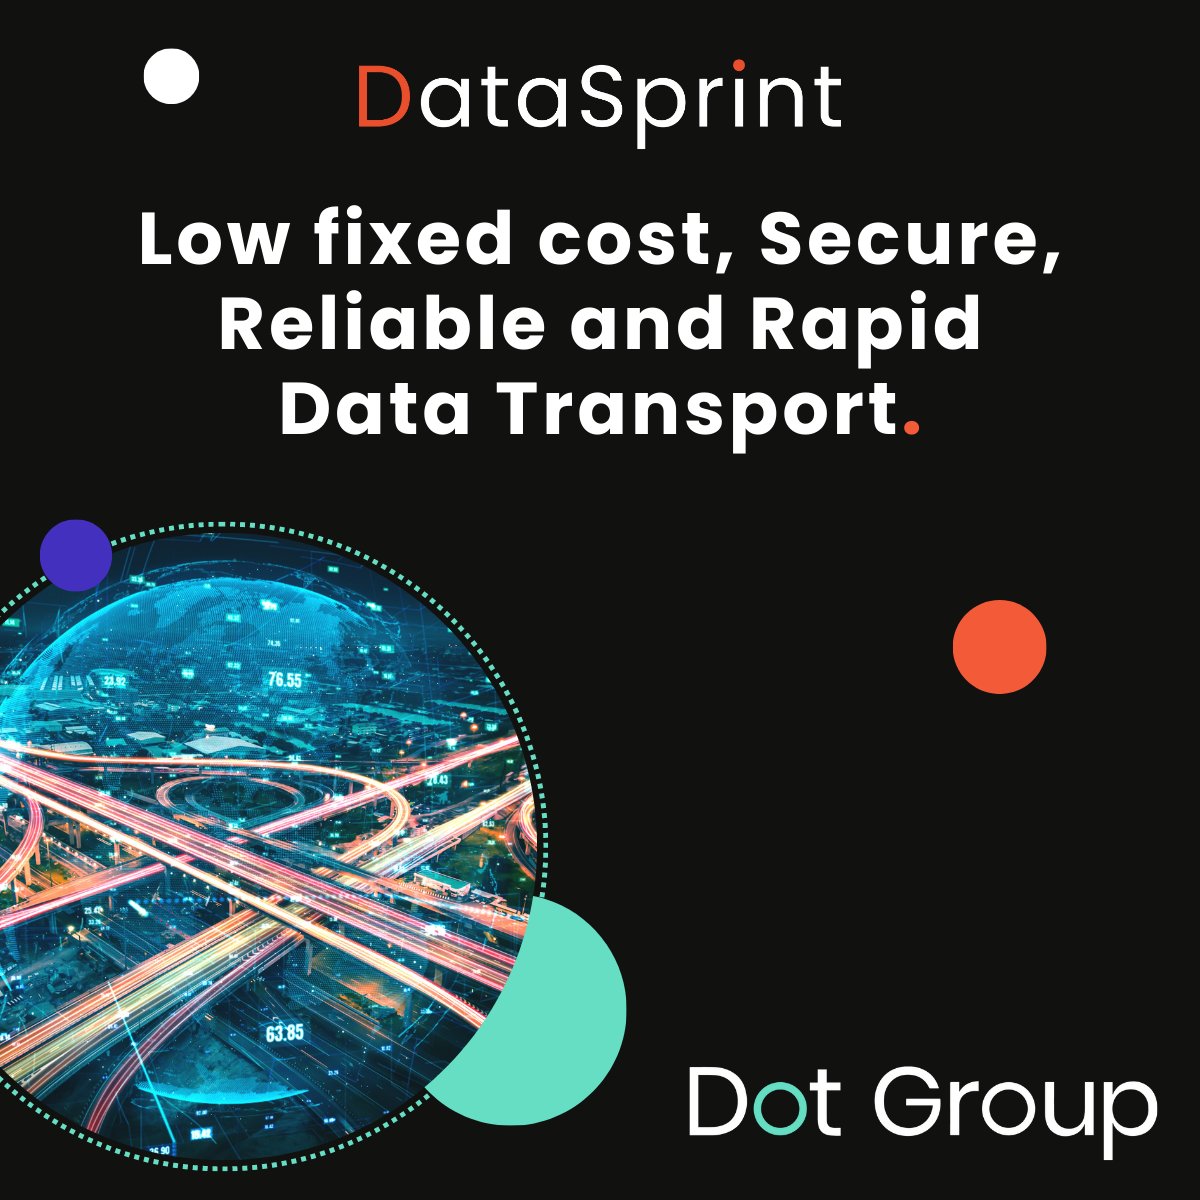 Tired of the unpredictable expense of large #media transfers? DataSprint offers fixed pricing and no limits on #datatransfer in size, frequency, or users.

#PoweredByIBMAspera #TheDataExperts #securetransfer #lightning #highspeed #contentprotection #securefiletransfer